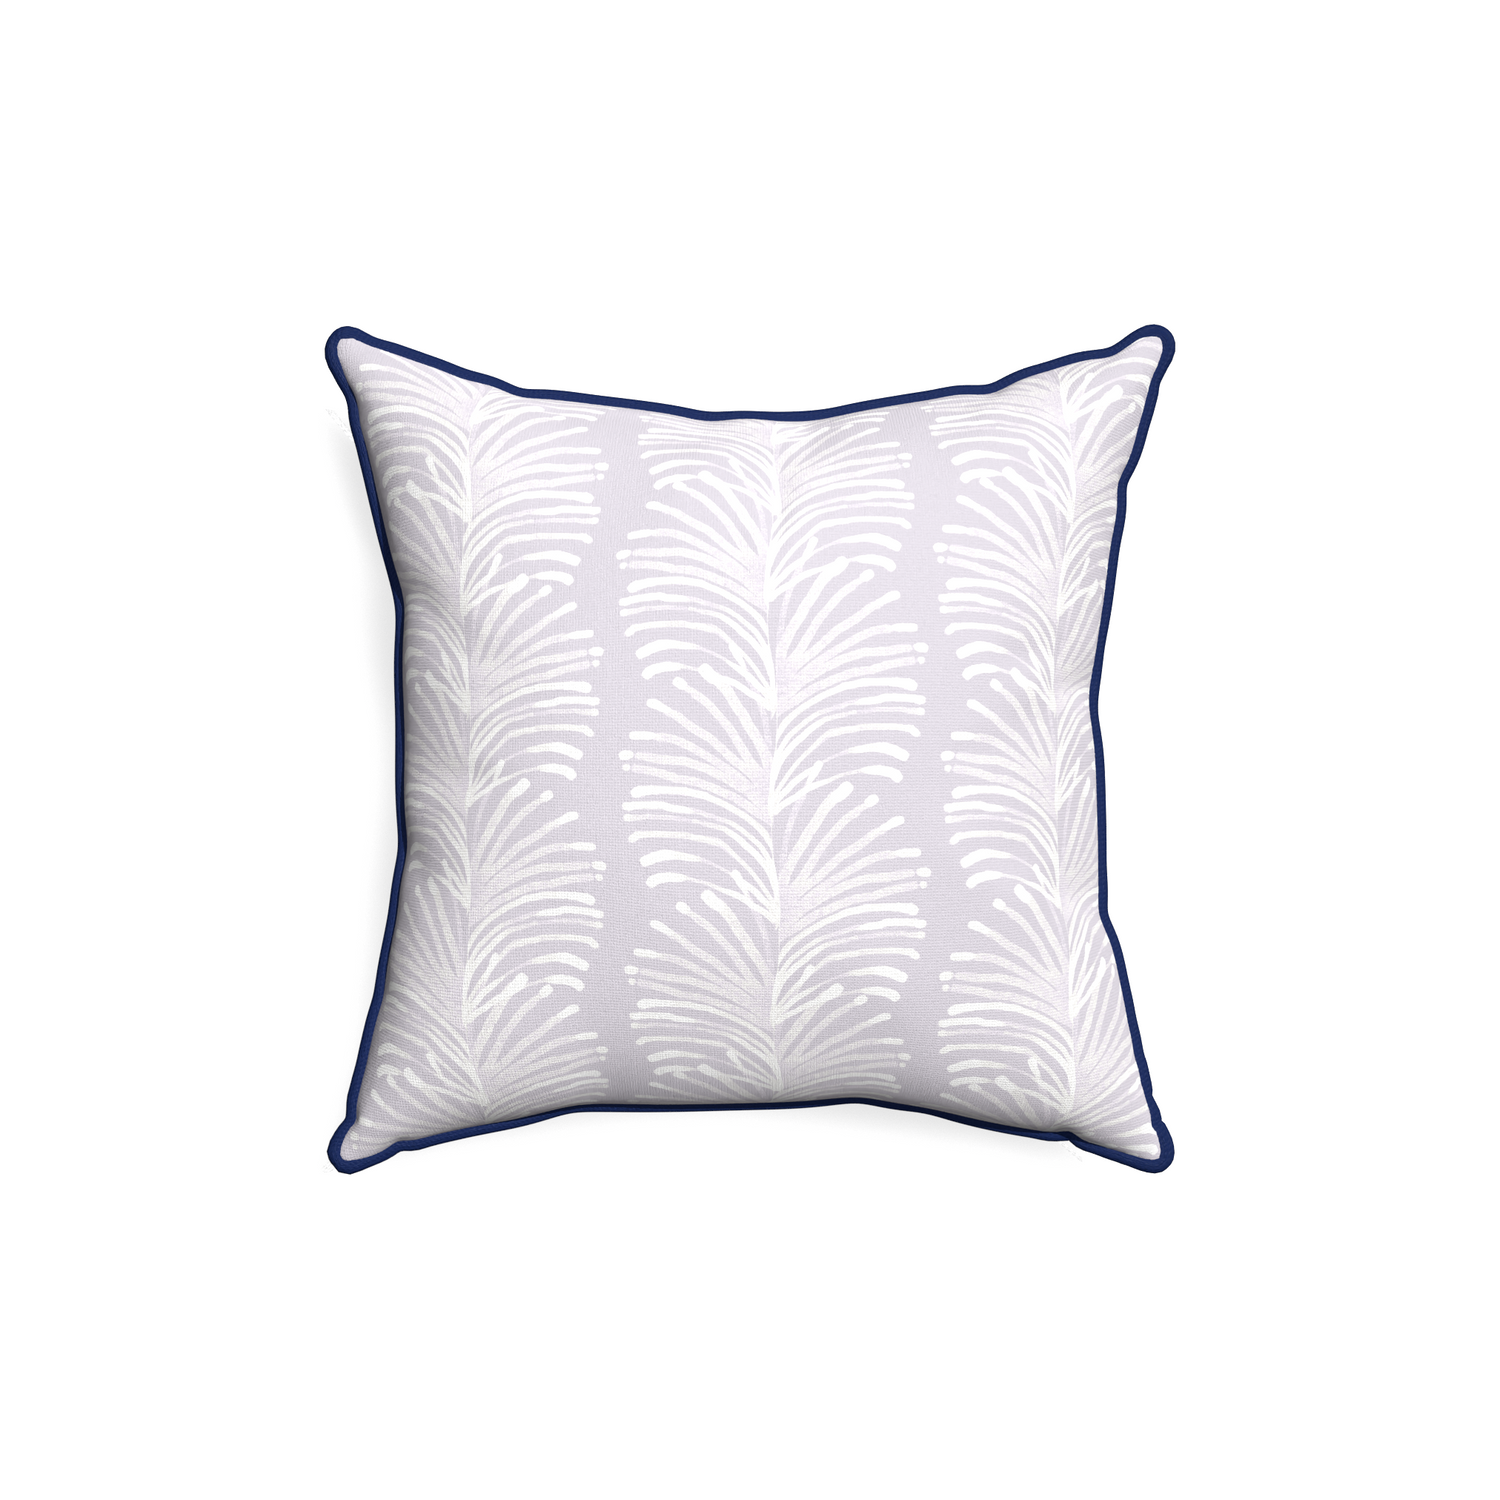 18-square emma lavender custom lavender botanical stripepillow with midnight piping on white background